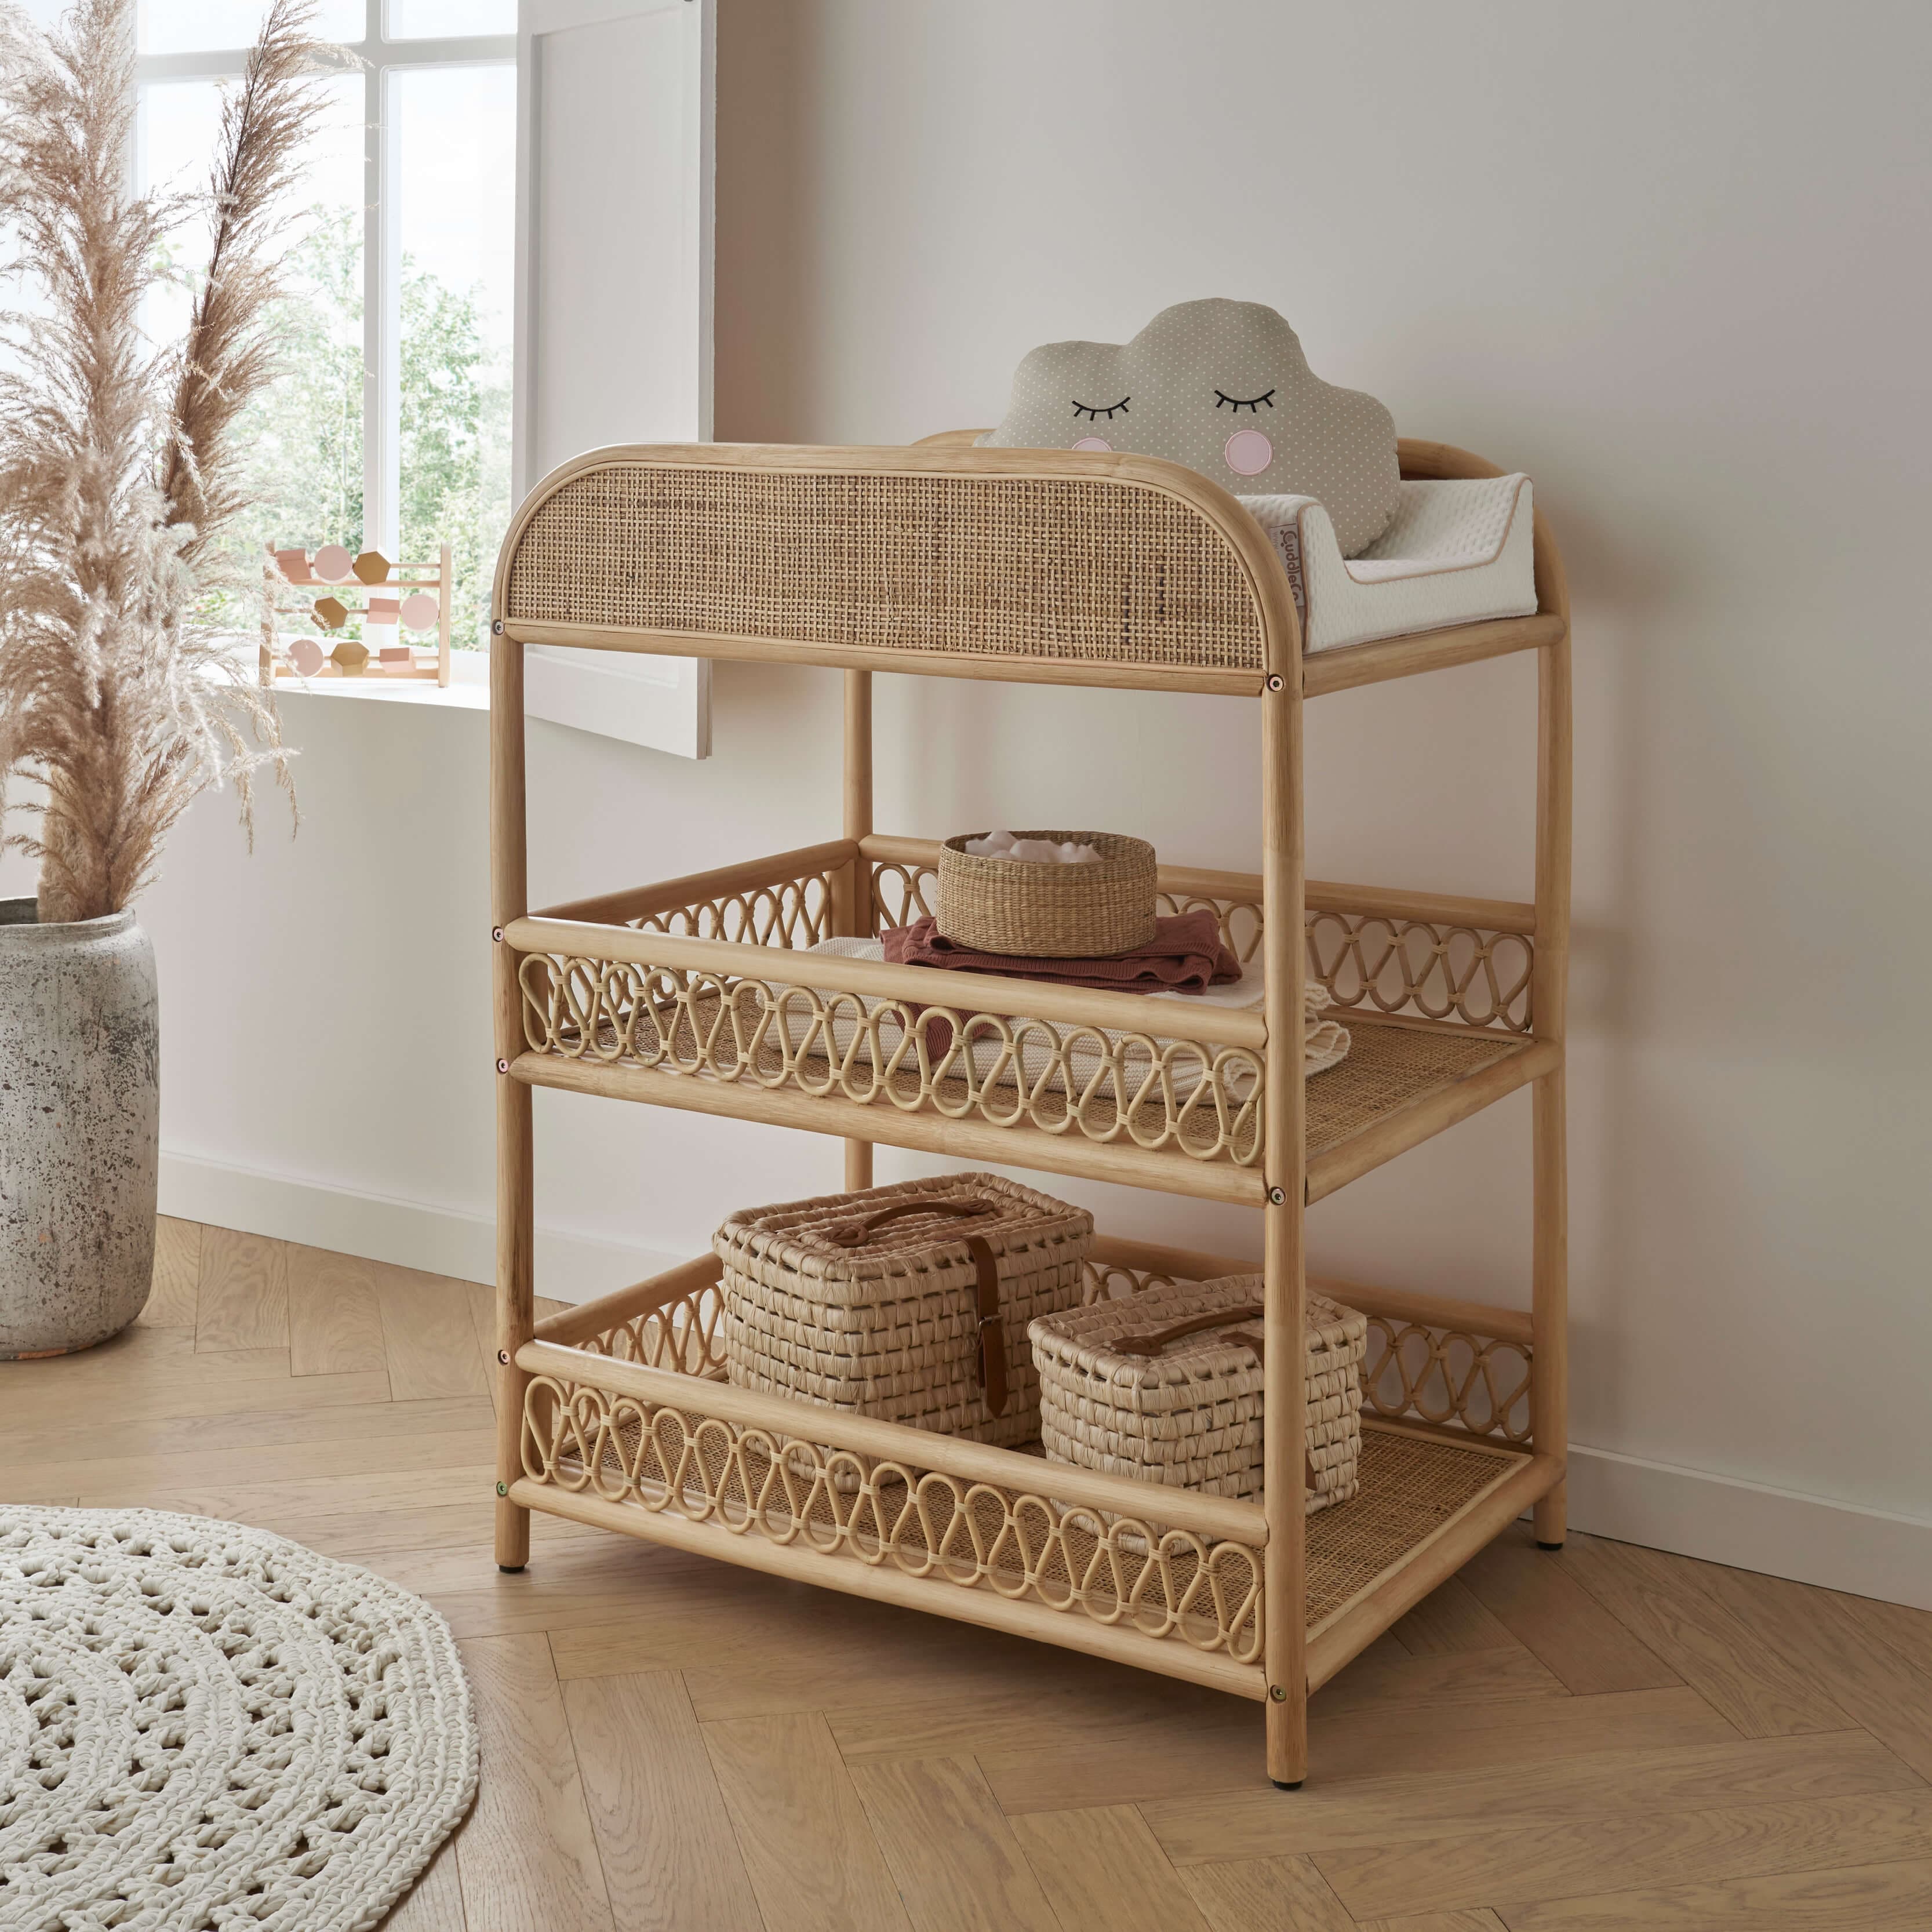 Cuddleco Aria 2 Piece Nursery Furniture Set - Rattan - For Your Little One